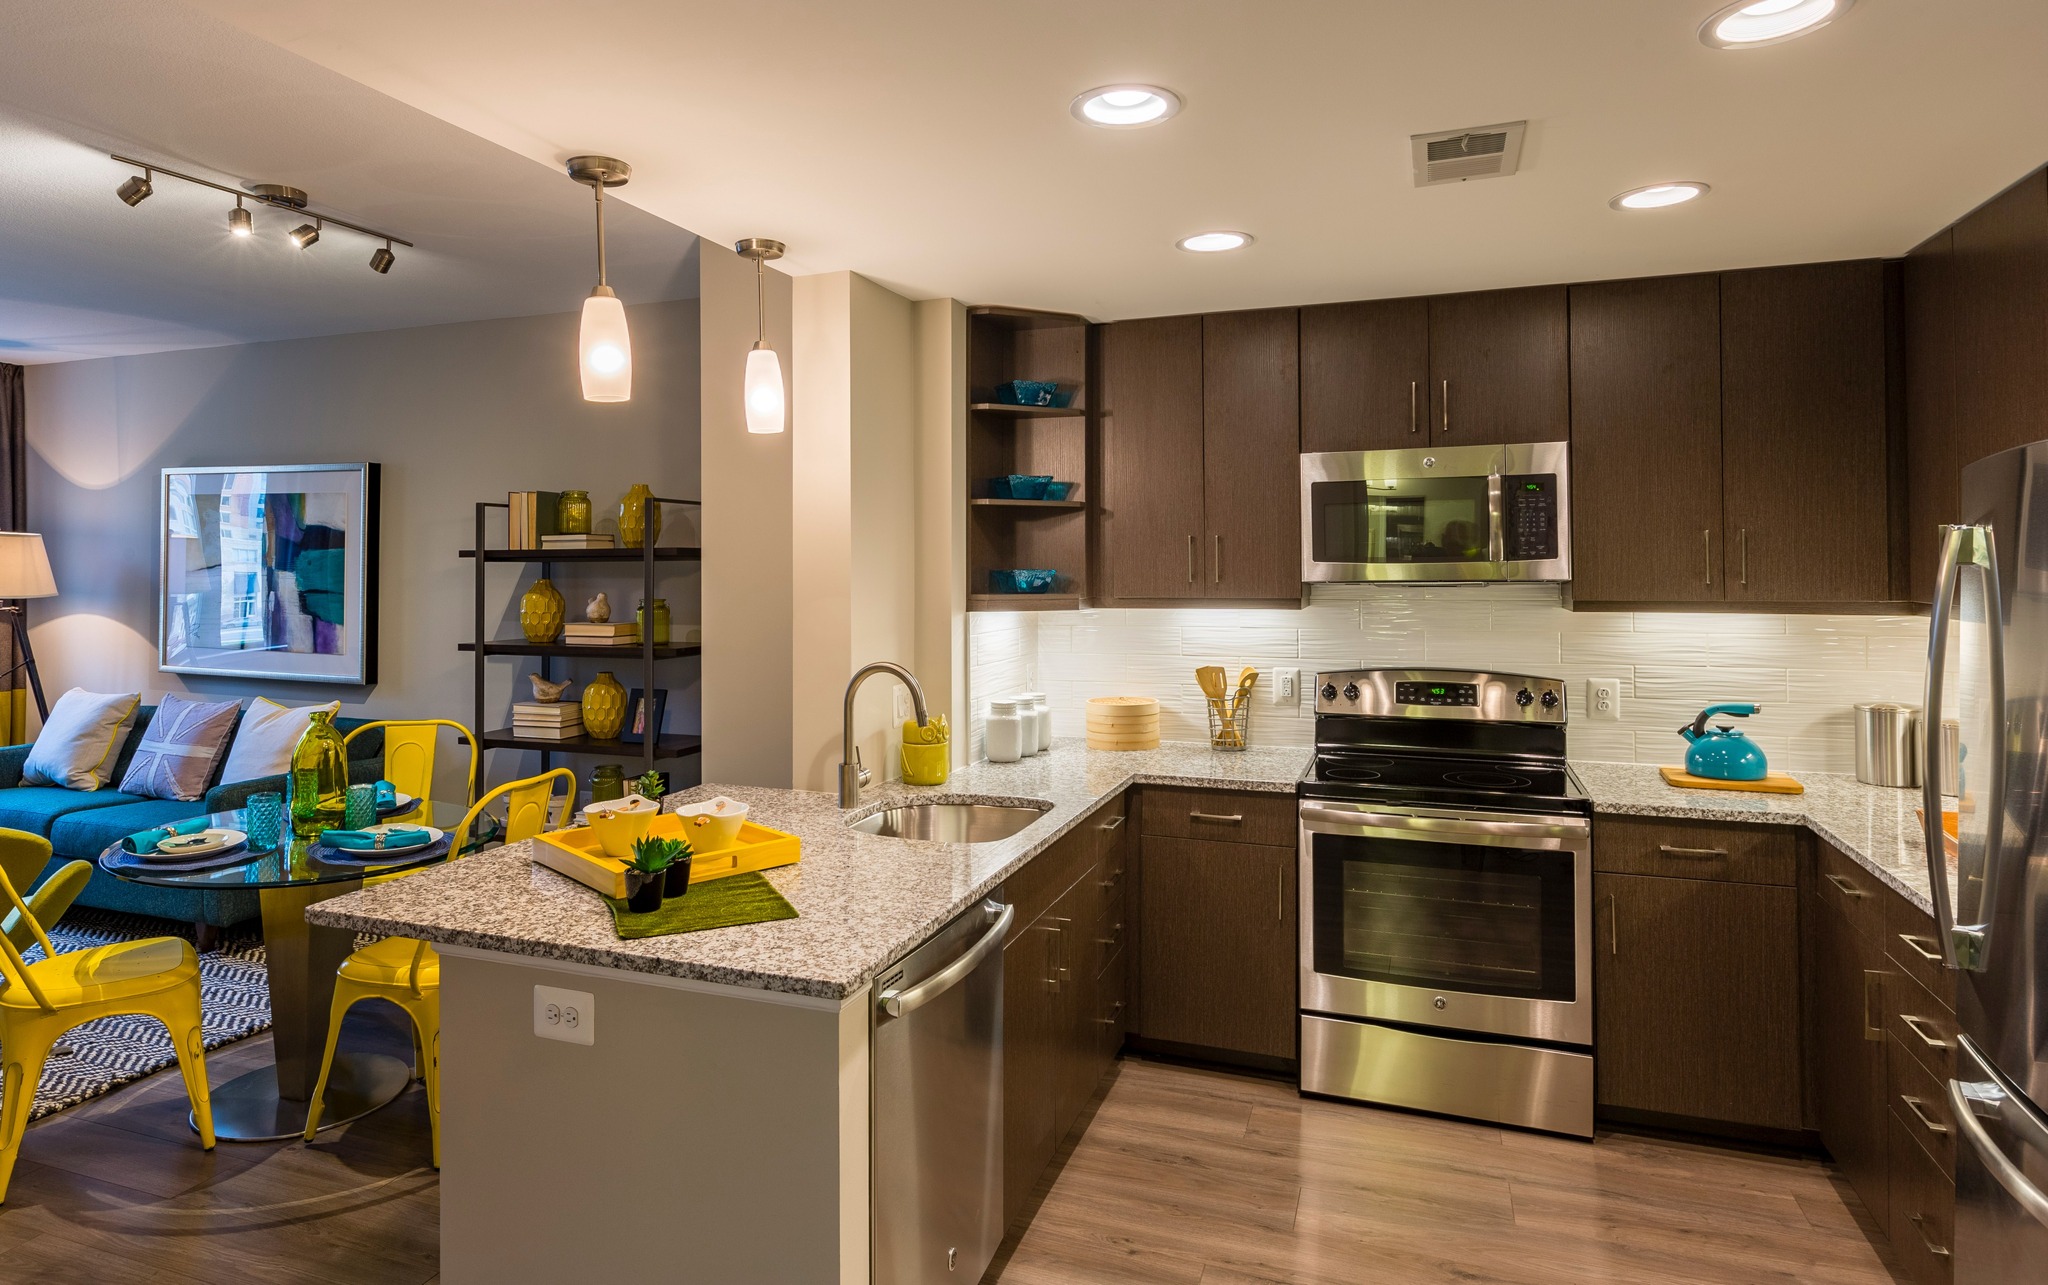 Image of An Open Kitchen with Granite Countertops, Wood-Style Flooring & Stainless Steel Appliances | Parc Meridian at Eisenhower Station | Luxury Alexandria VA Apartments